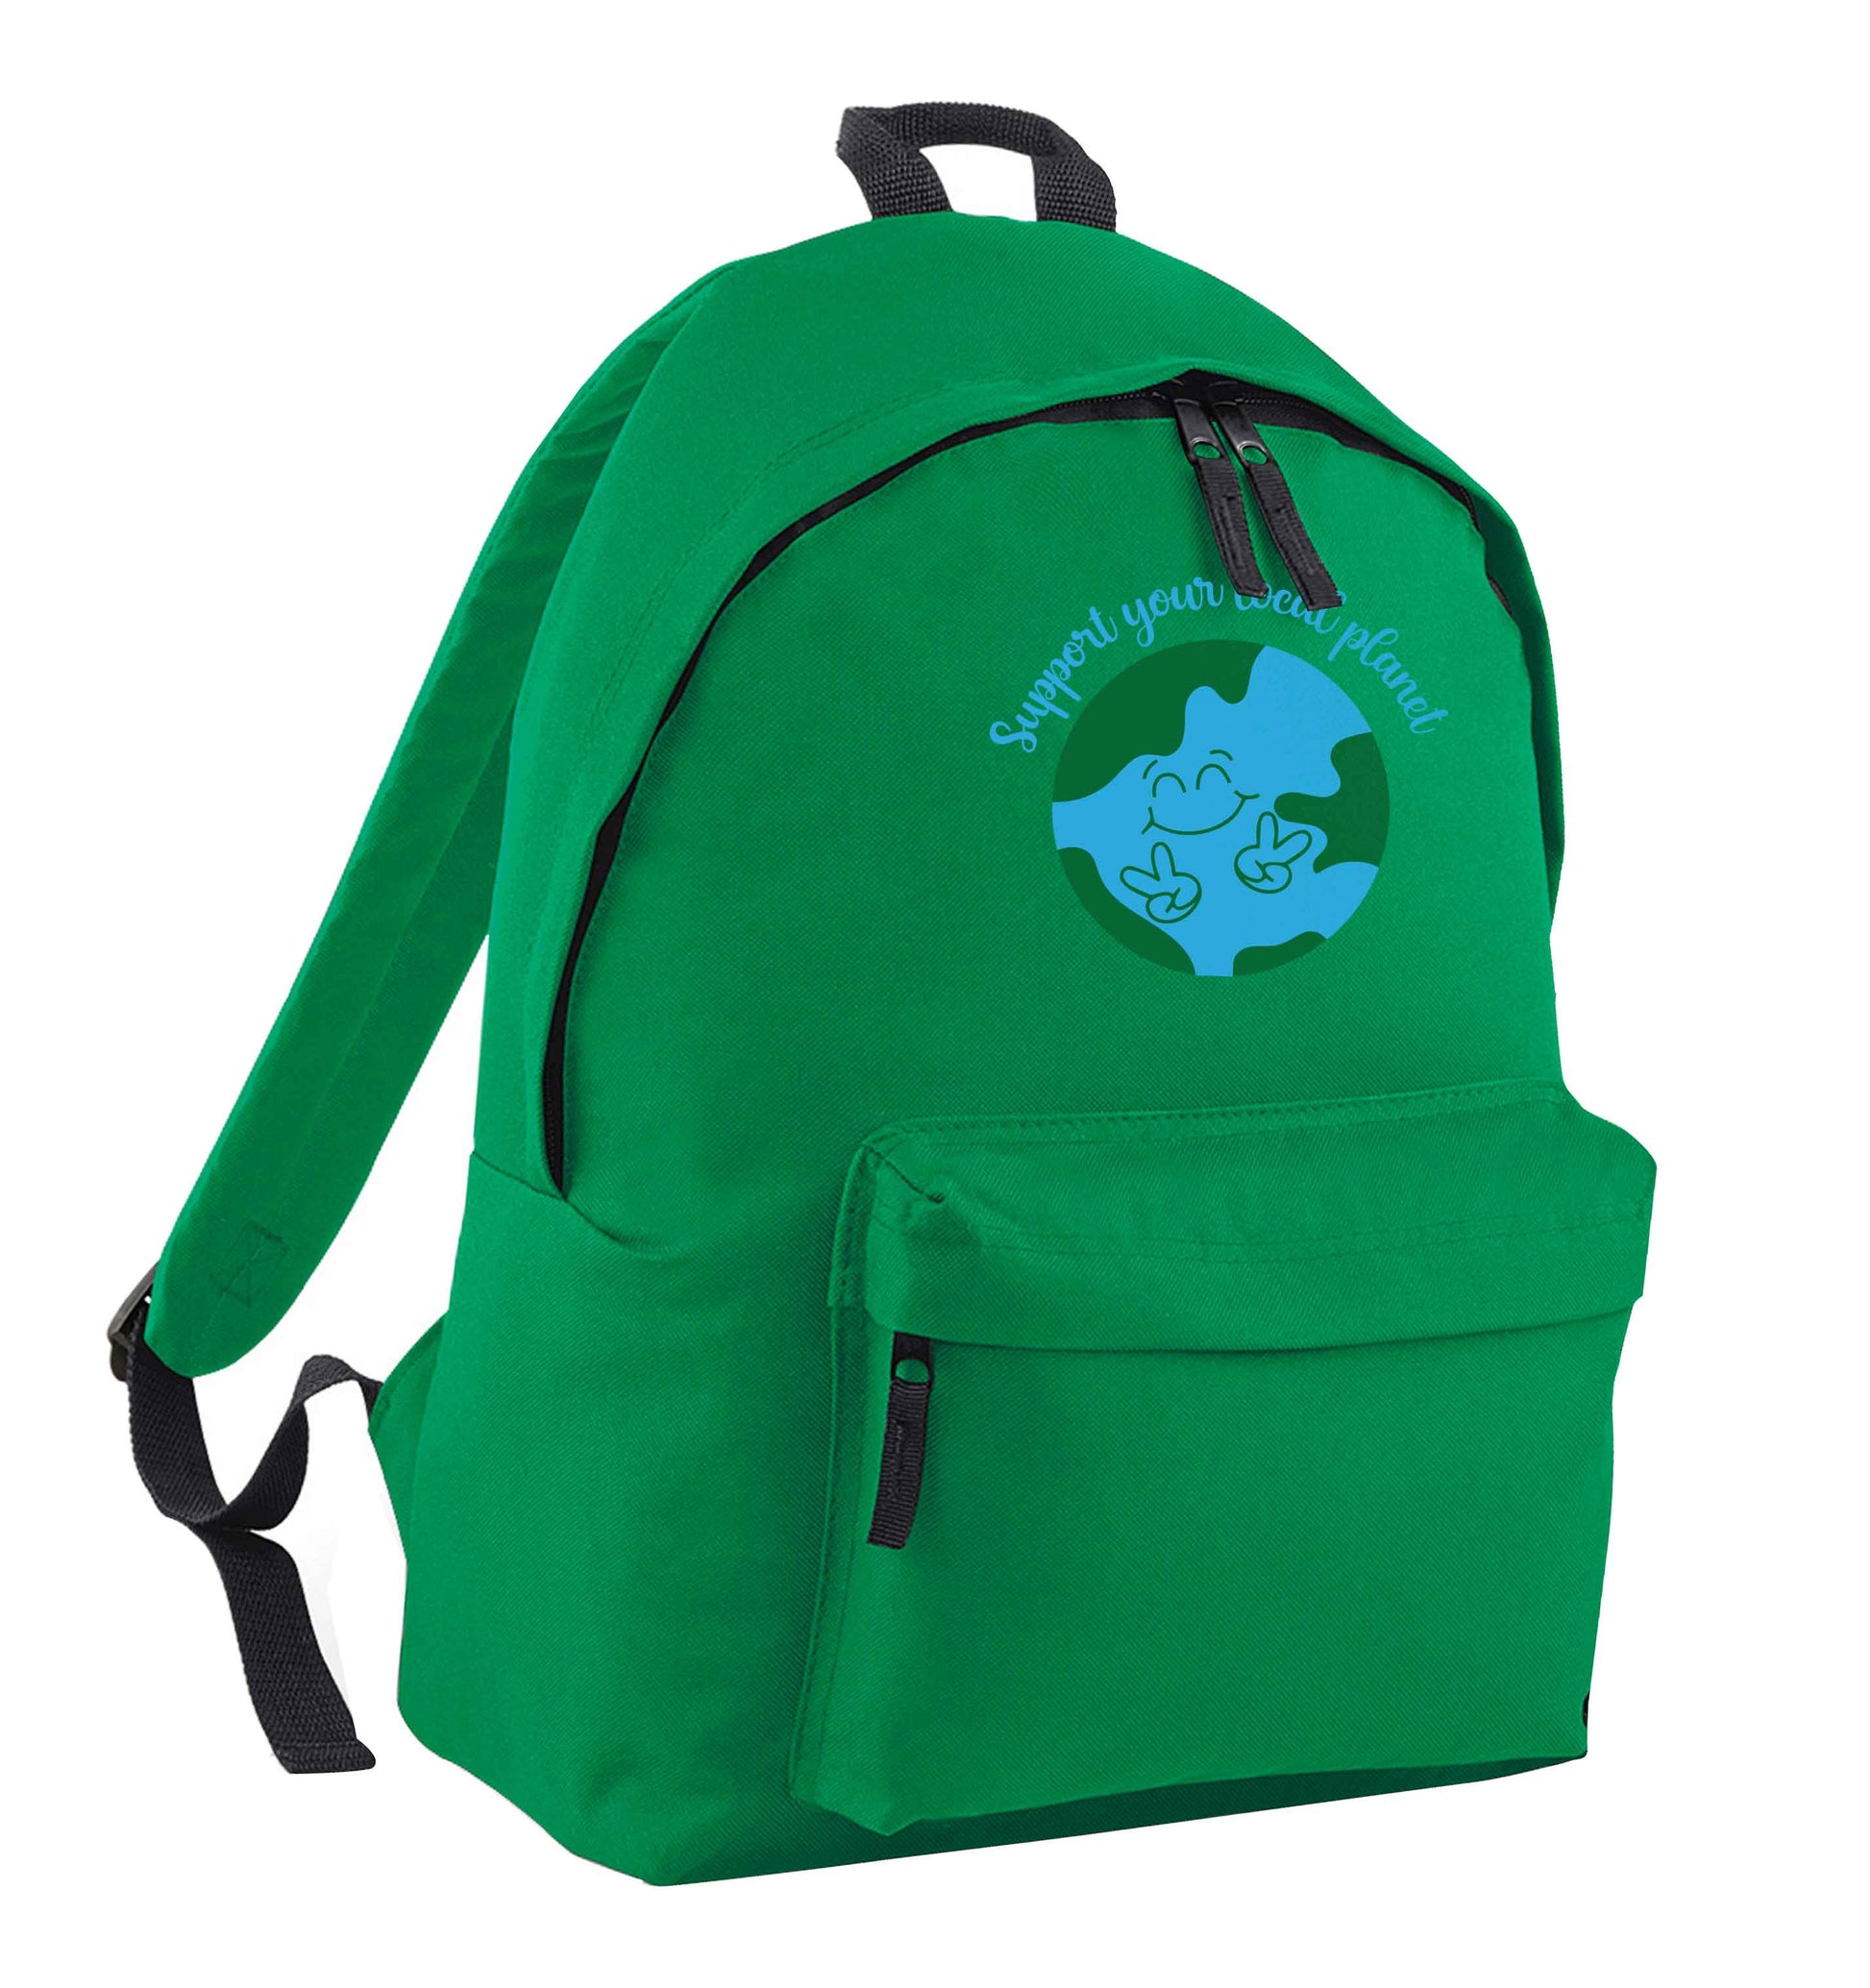 Support your local planet green adults backpack